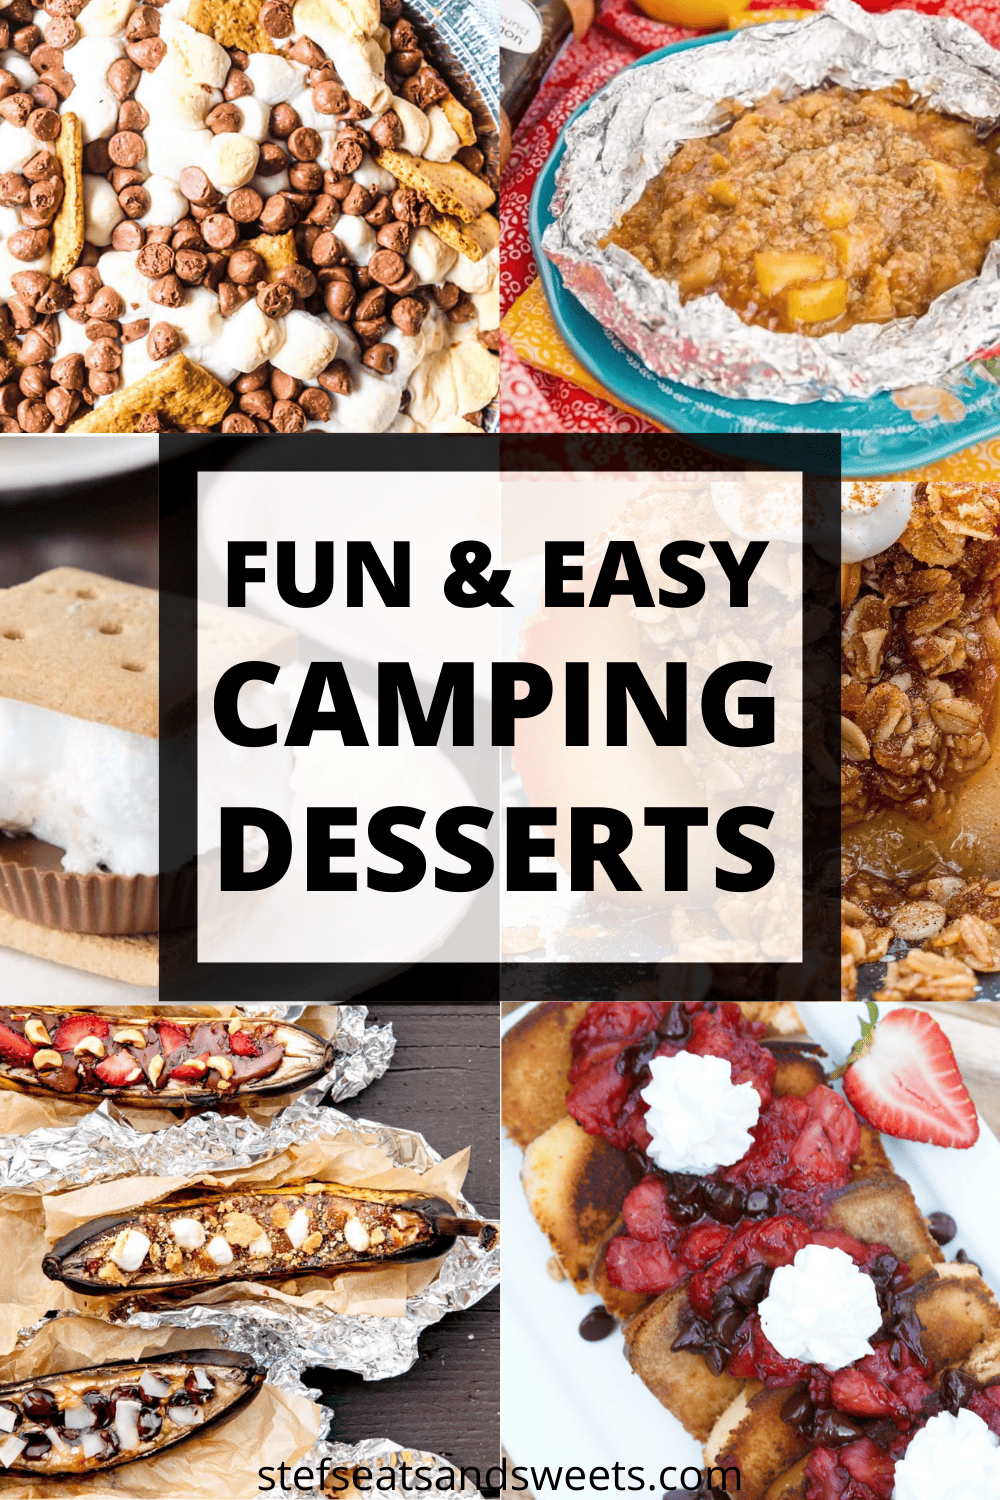 Camping Desserts that are fun and easy